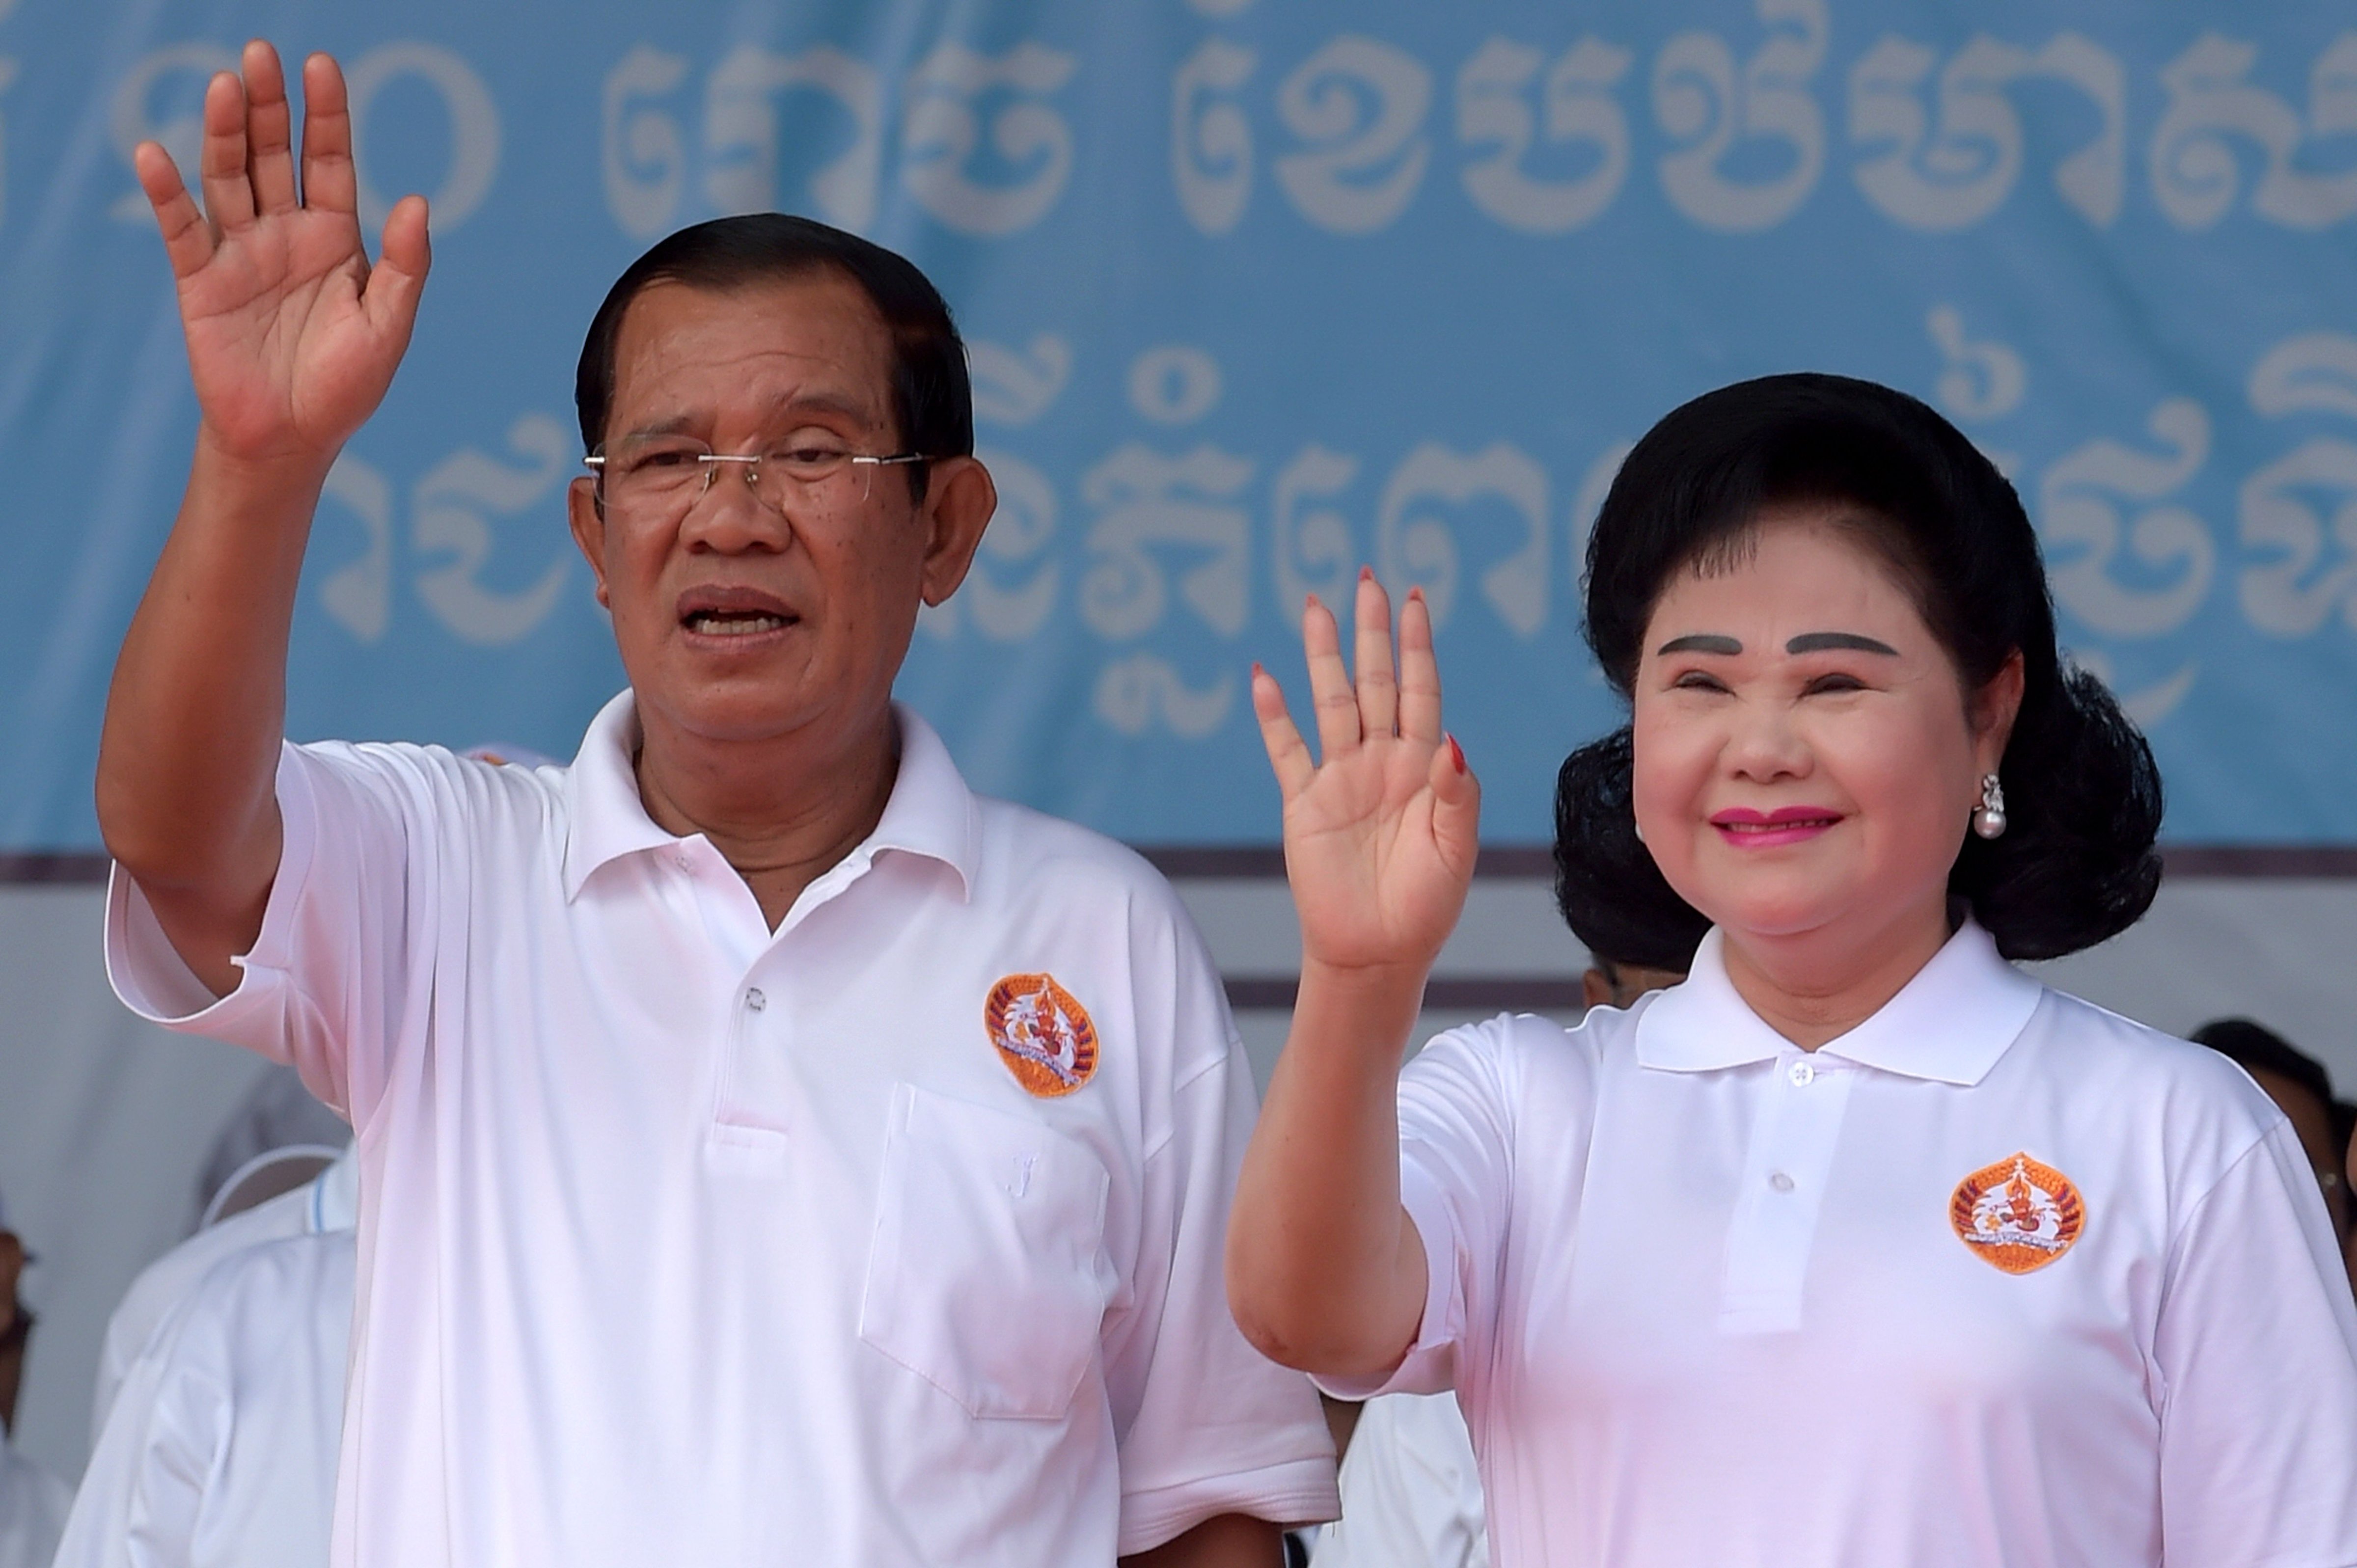 Hun Sen, Prime Minister and leader of the Cambodian People's Party and his wife Bun Rany during a general election campaign in Phnom Penh on July 7, 2018. (Tang Chhin Sothy—AFP/Getty Images)